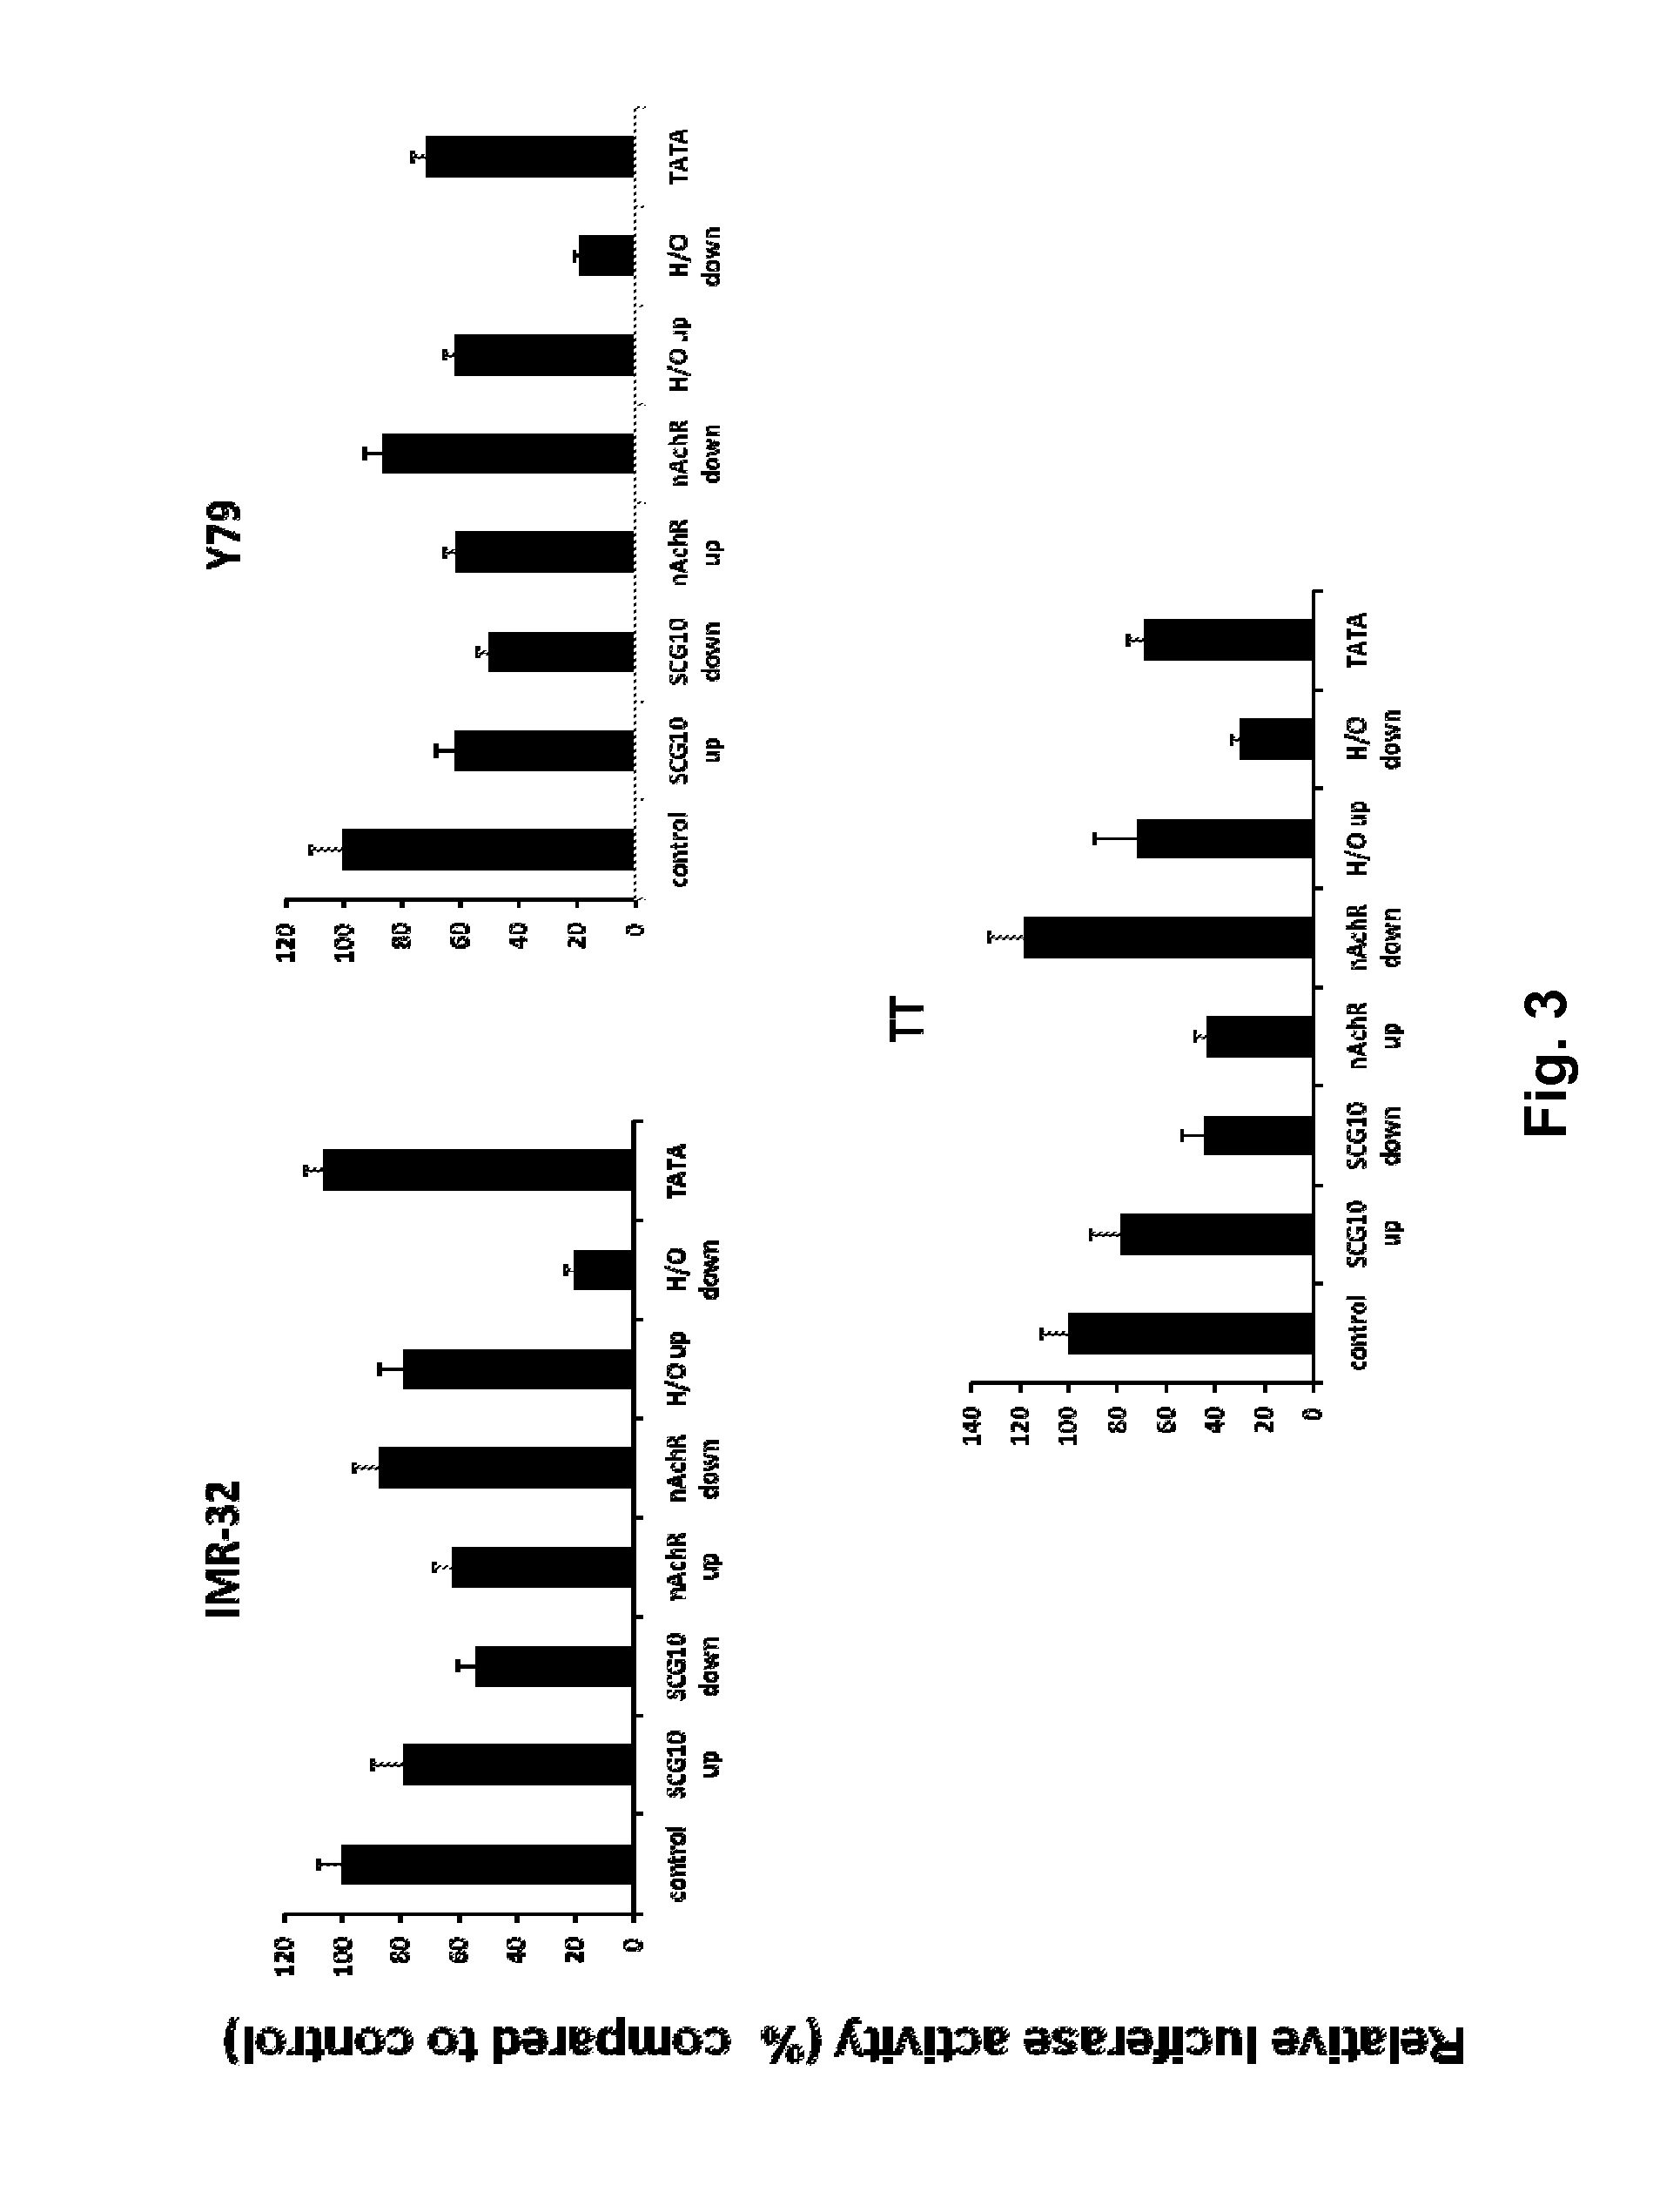 Modified INSM1-Promoter for Neuroendocrine Tumor Therapy and Diagnostics